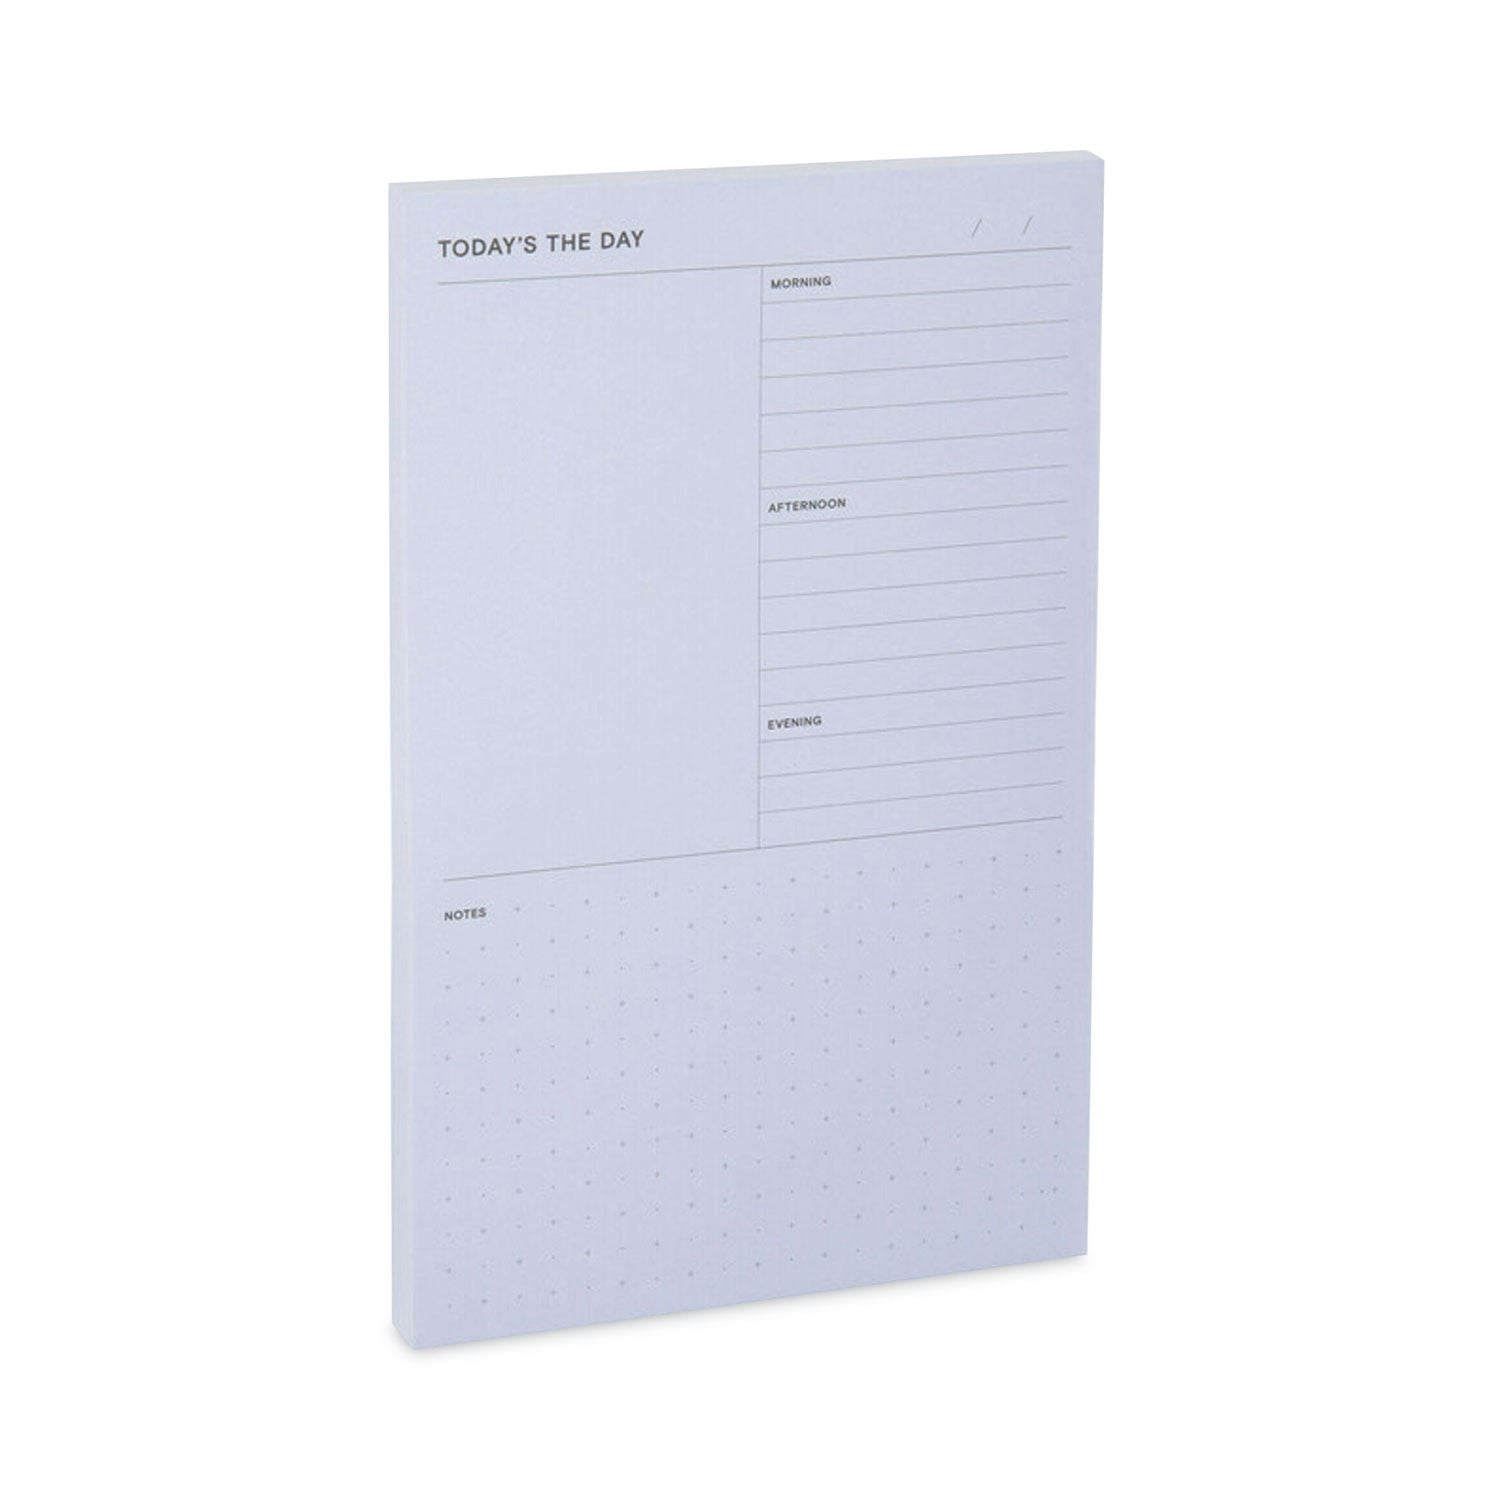 adhesive-daily-planner-sticky-note-pads-daily-planner-format-49-x-77-blue-100-sheets-pad_mmm58blu - 6